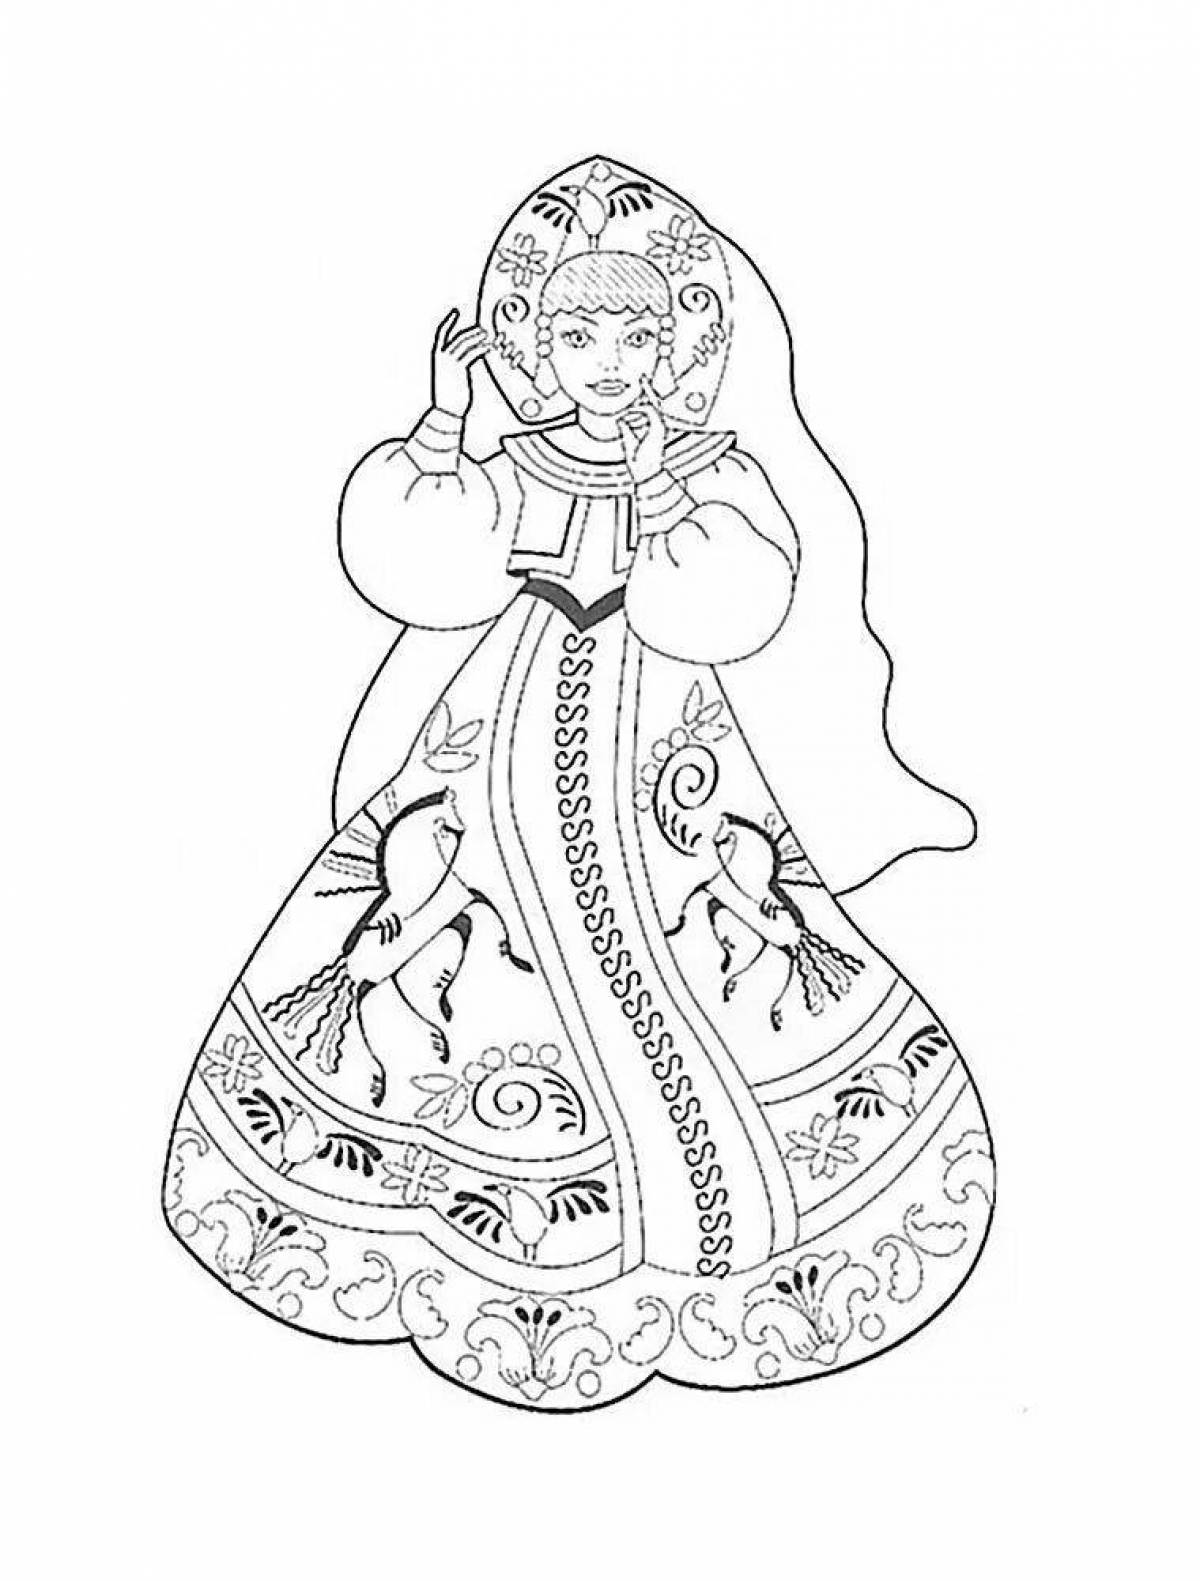 Delightful coloring page of a girl in a Russian folk costume